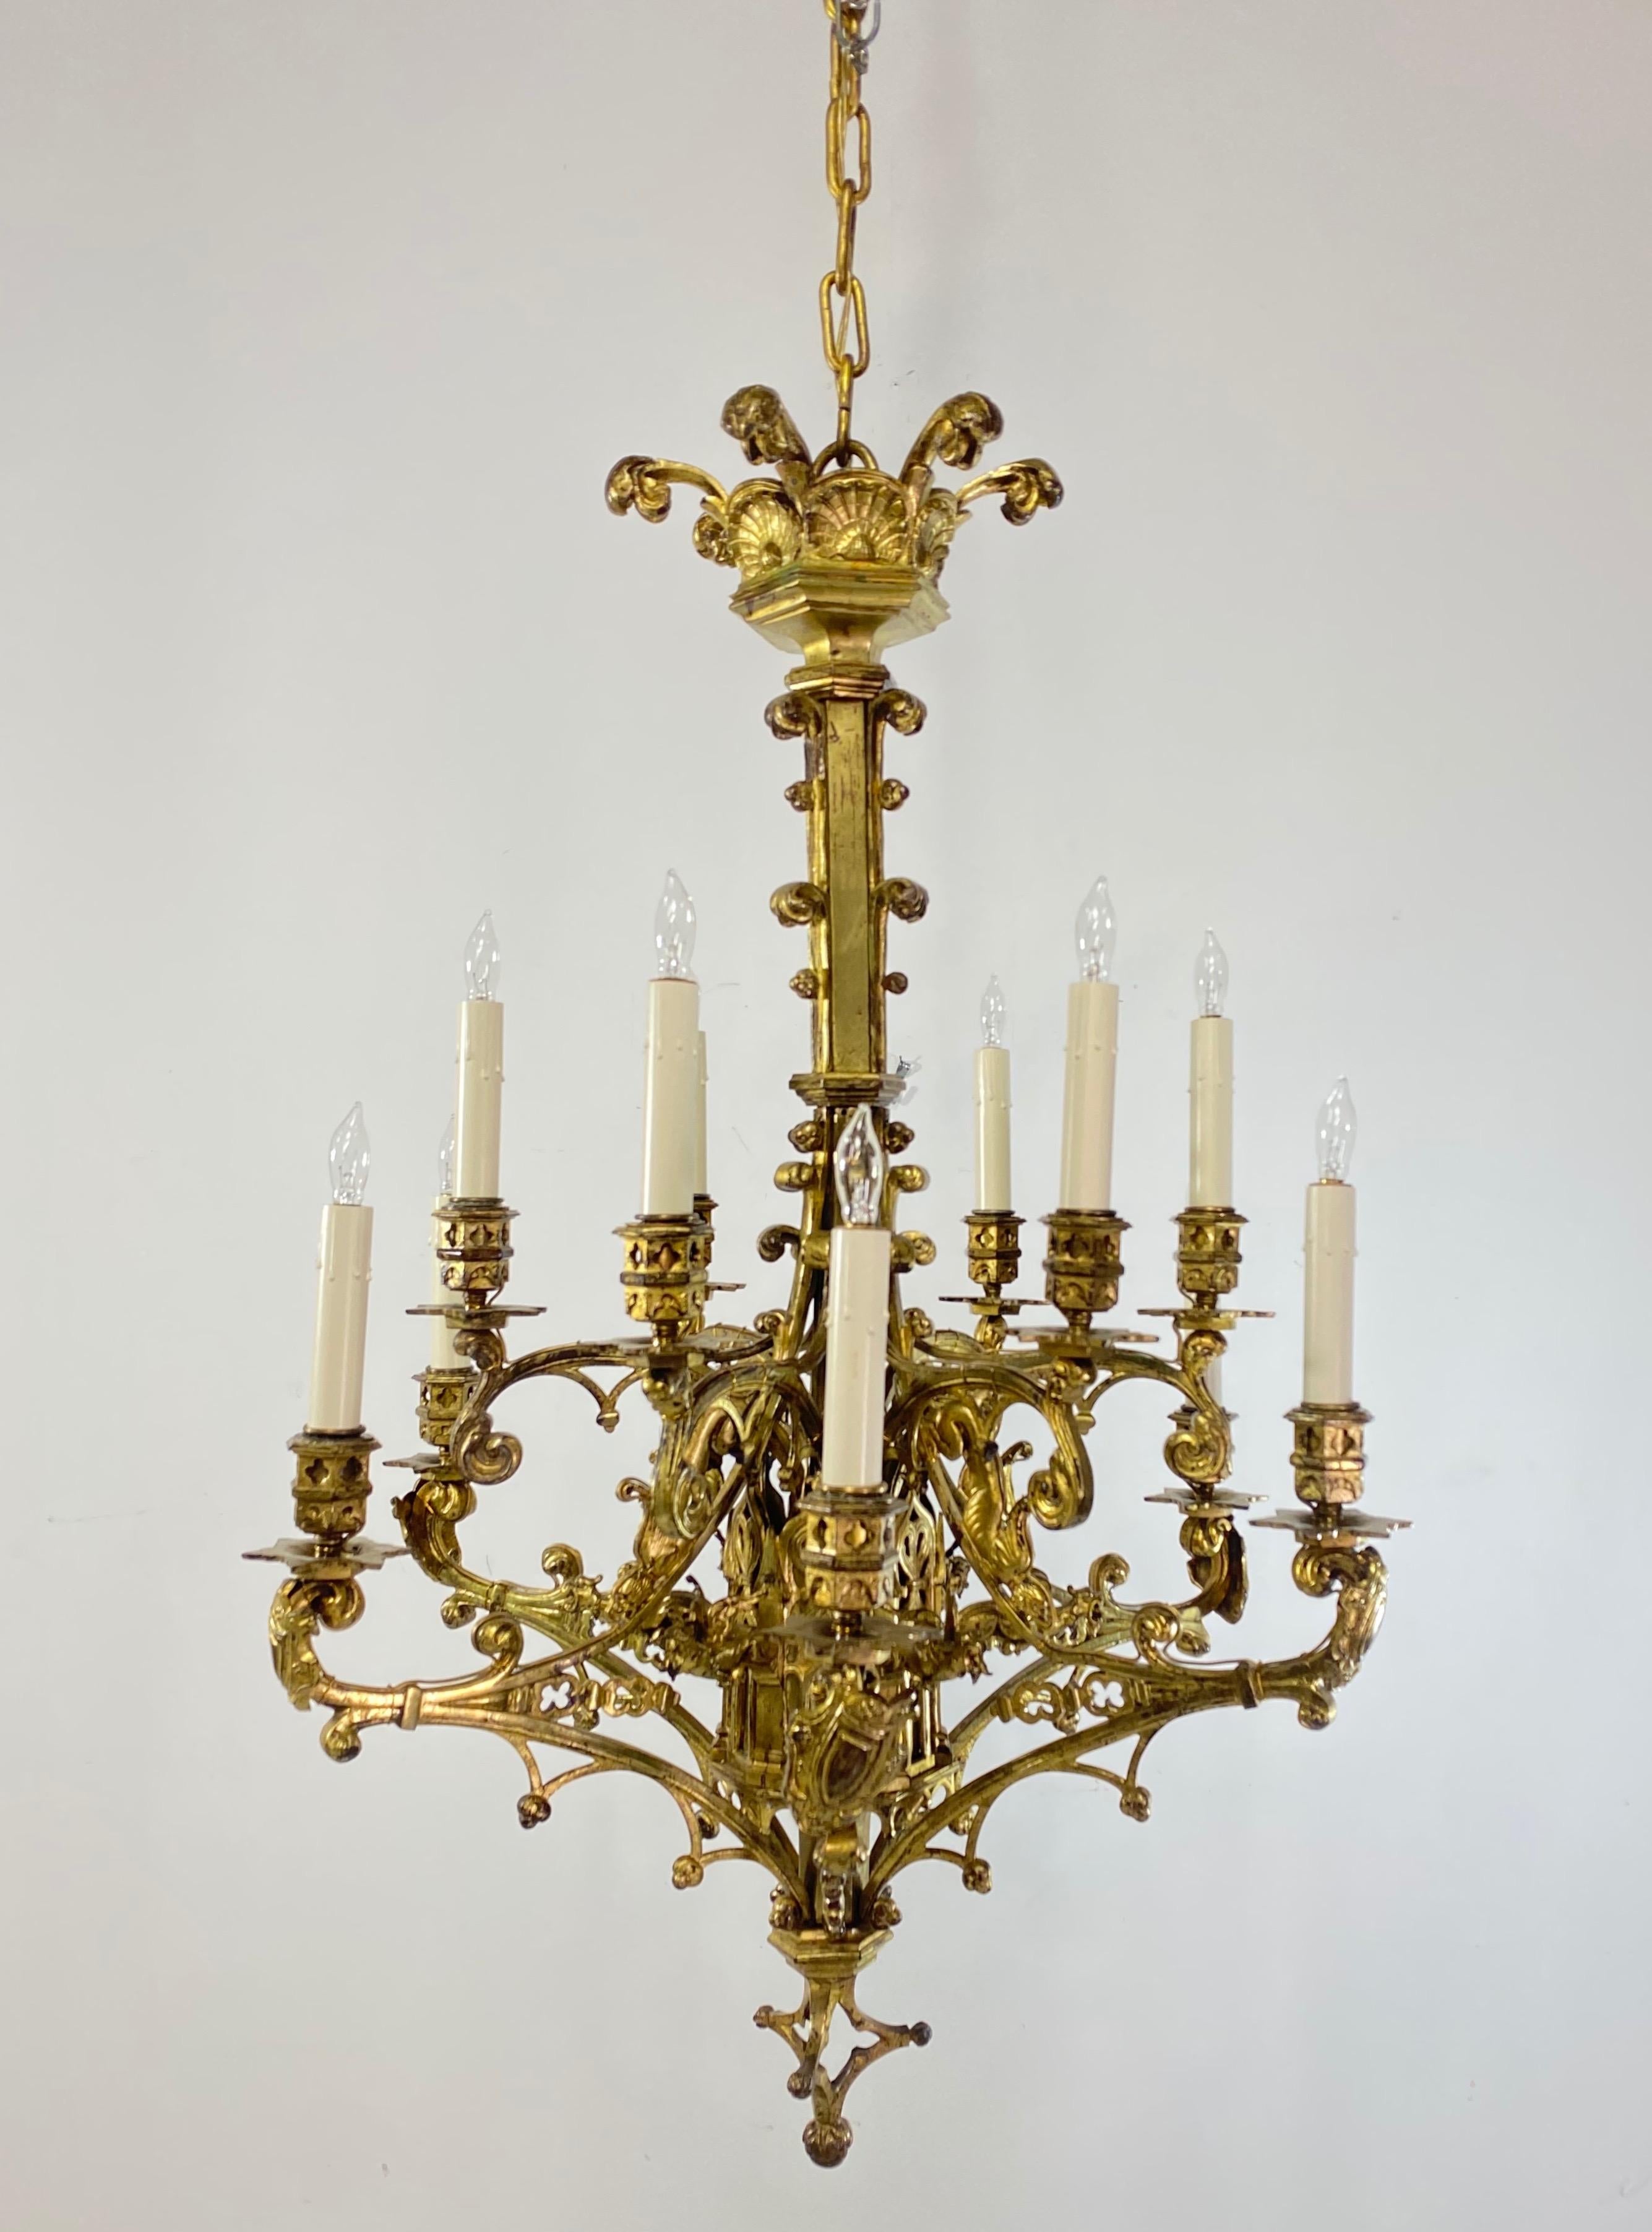 An exceptional solid gilt bronze Gothic Revival period light fixture in the manner of Augustus Pugin. Very high quality casting with superb detail. Originally held candles, has recently been refurbished and French wired for electricity.
England,